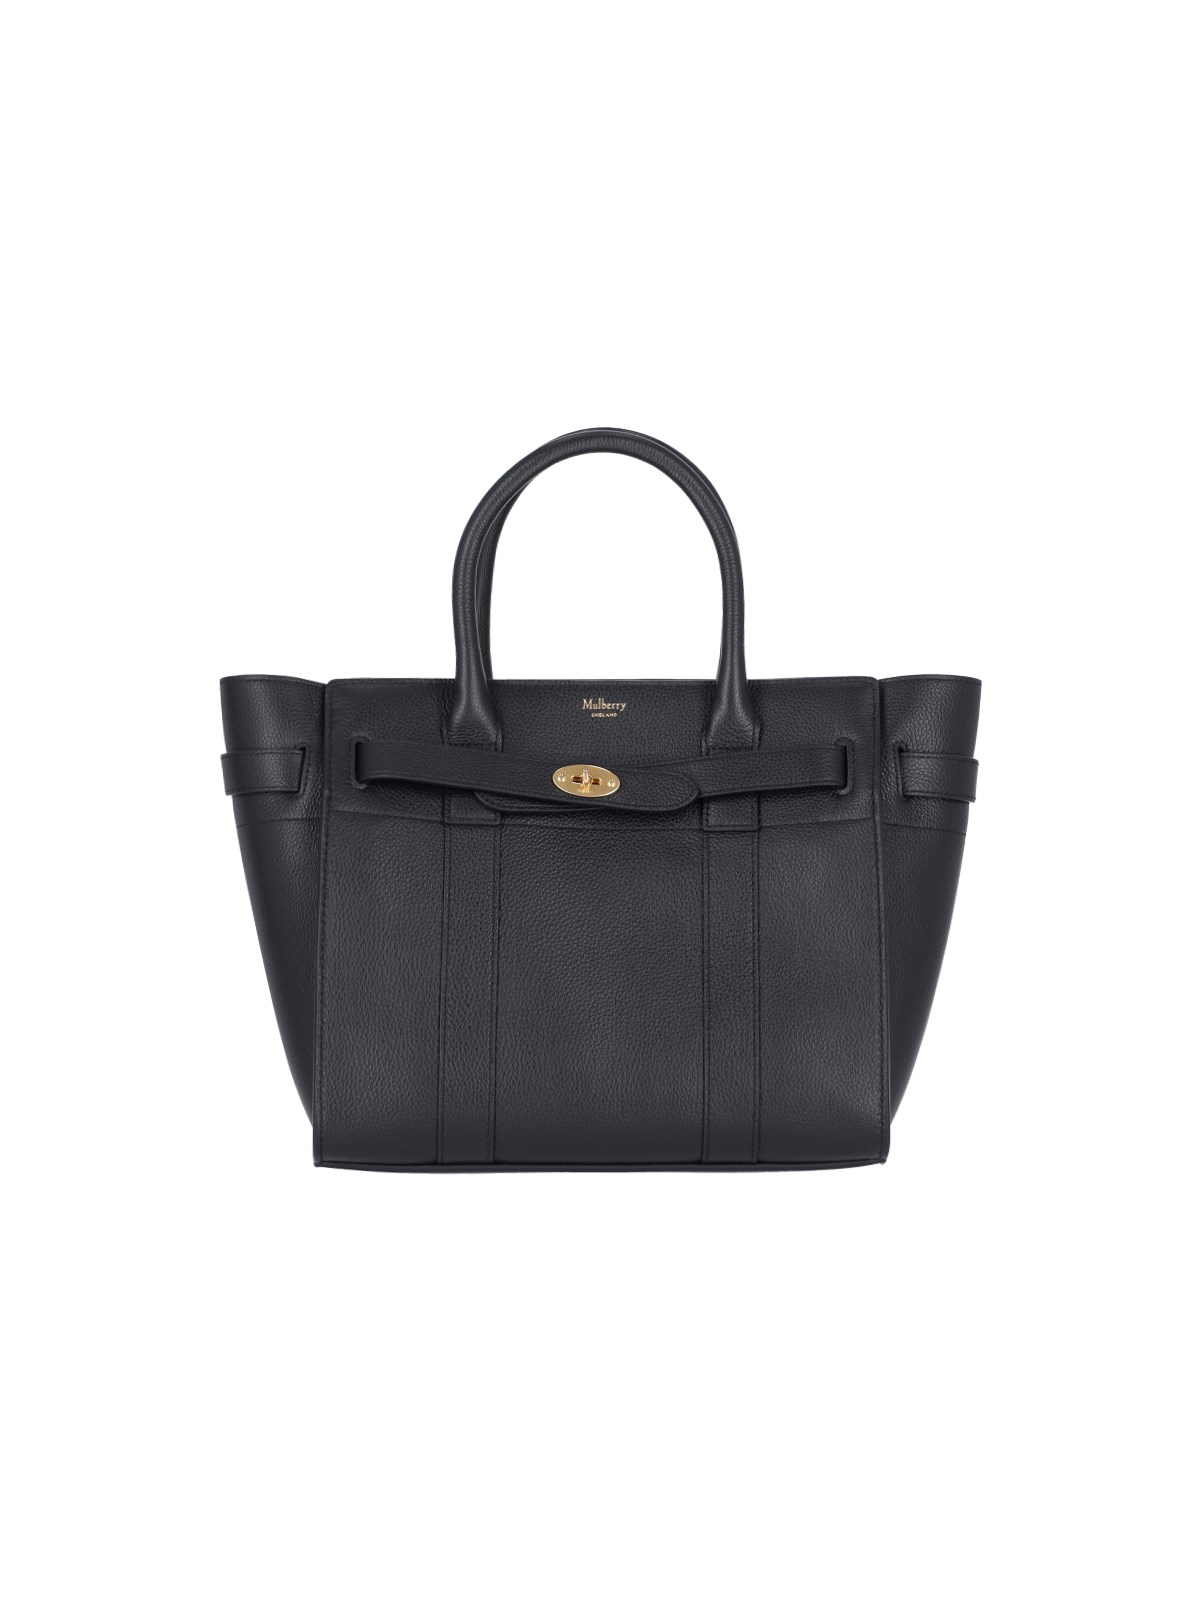 MULBERRY 'BAYSWATER' SMALL HAND BAG